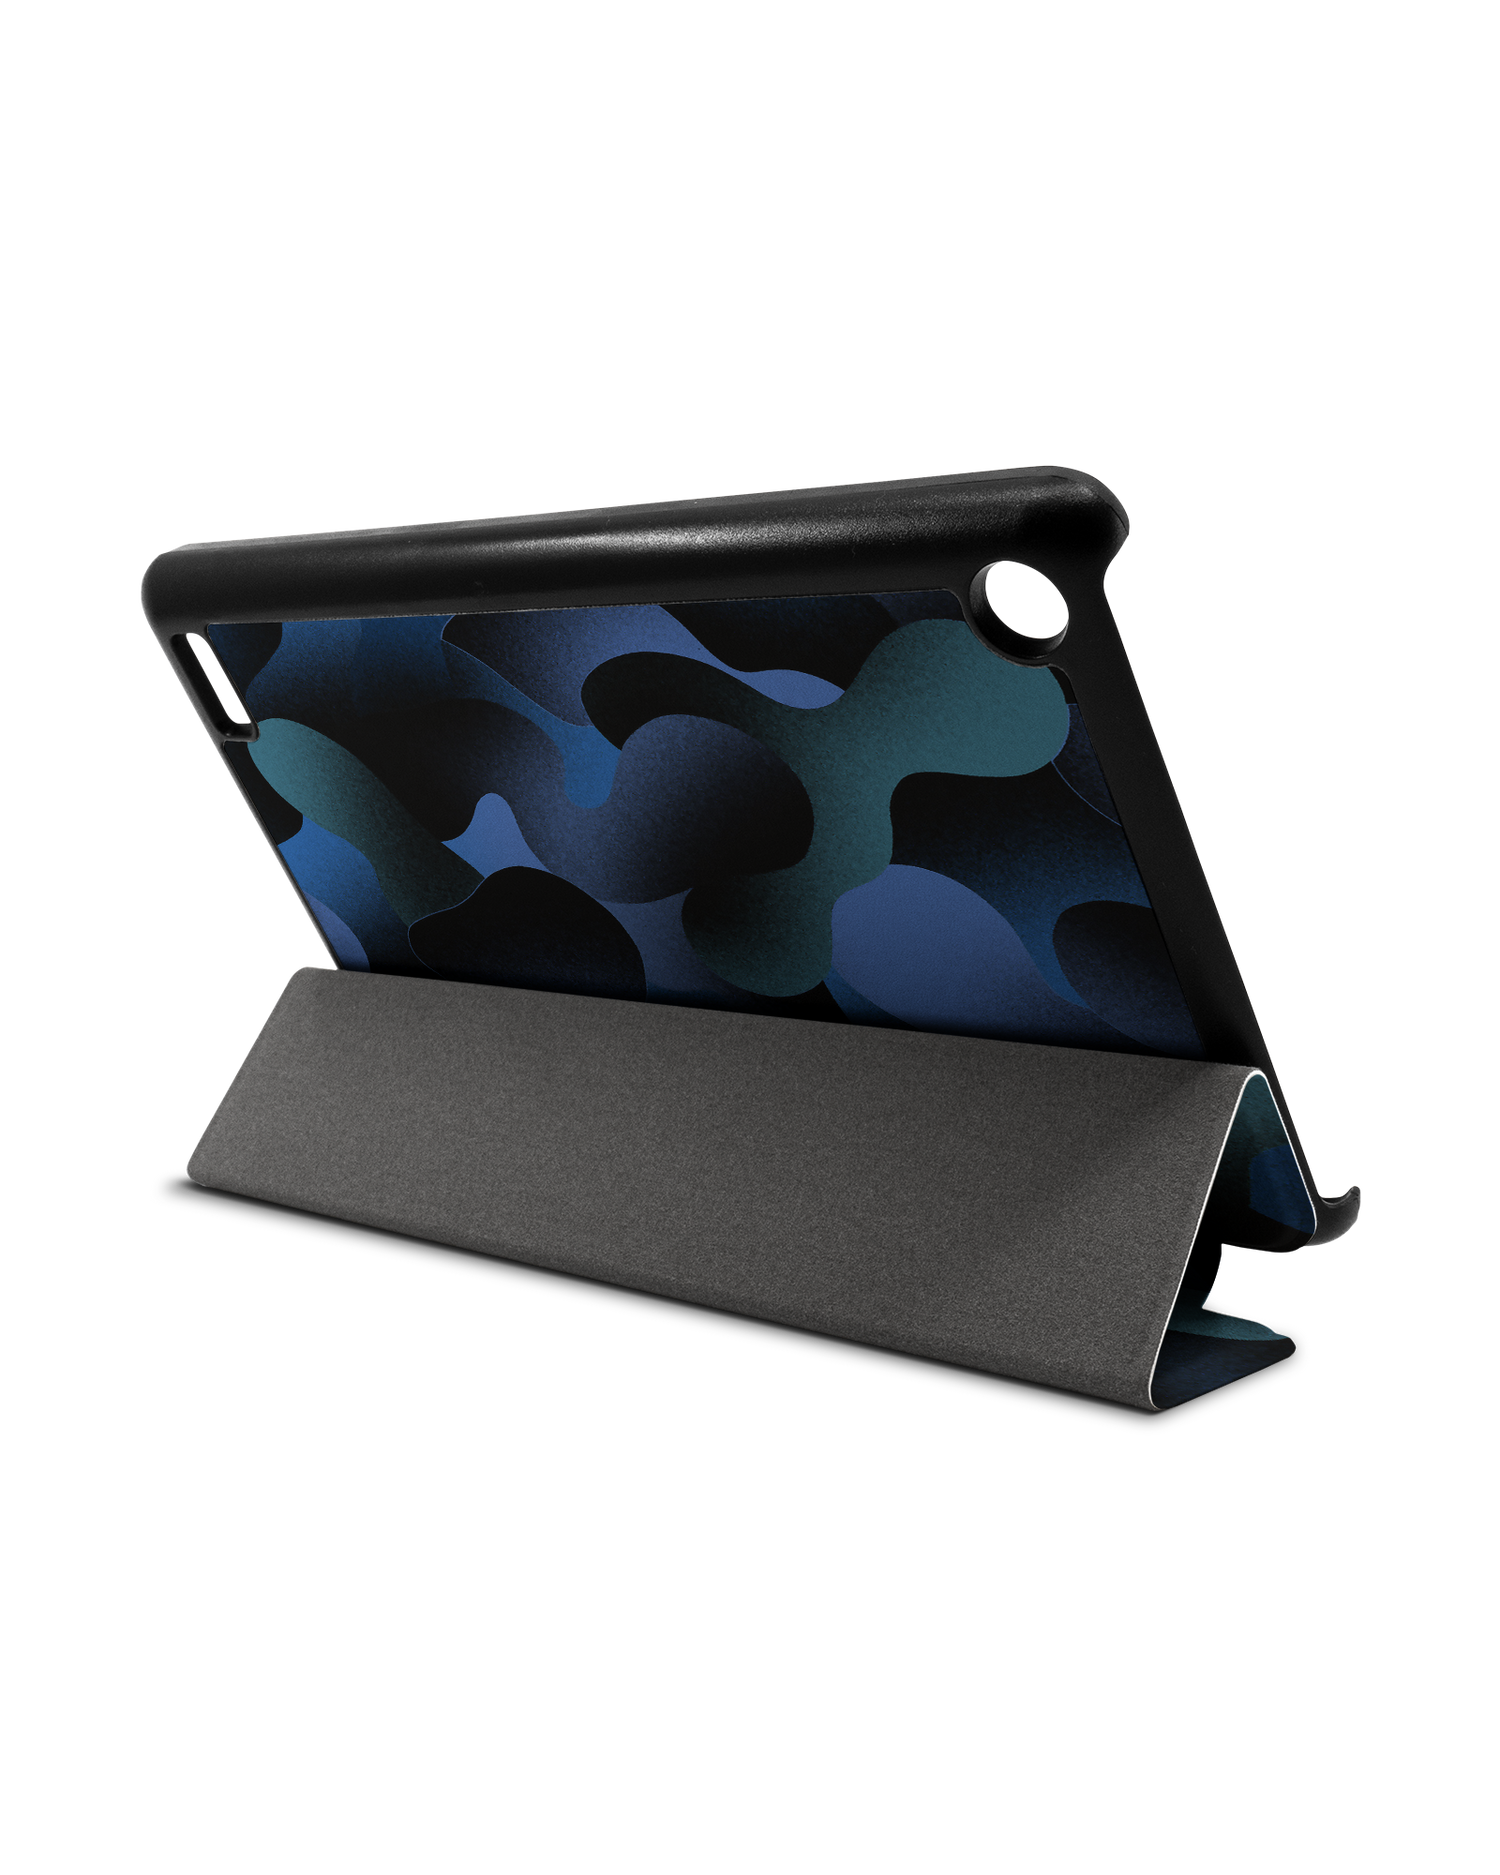 Night Moves Tablet Smart Case for Amazon Fire 7: Used as Stand